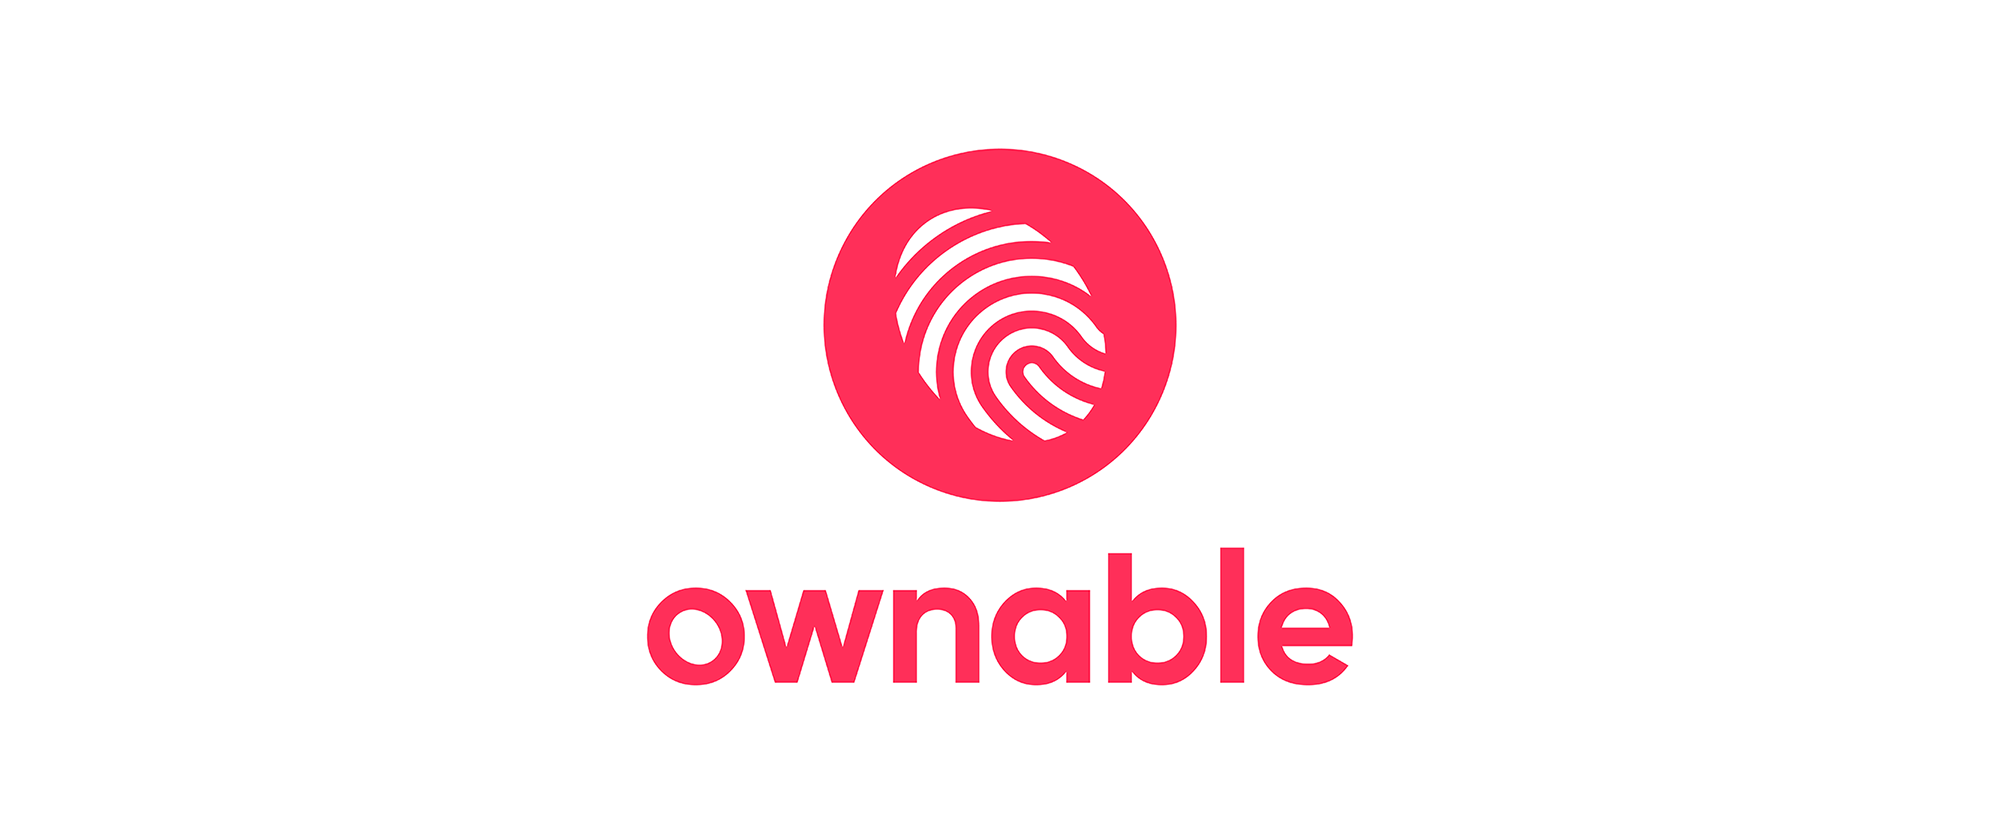 New Name, Logo, and Identity for Ownable by The Clearing